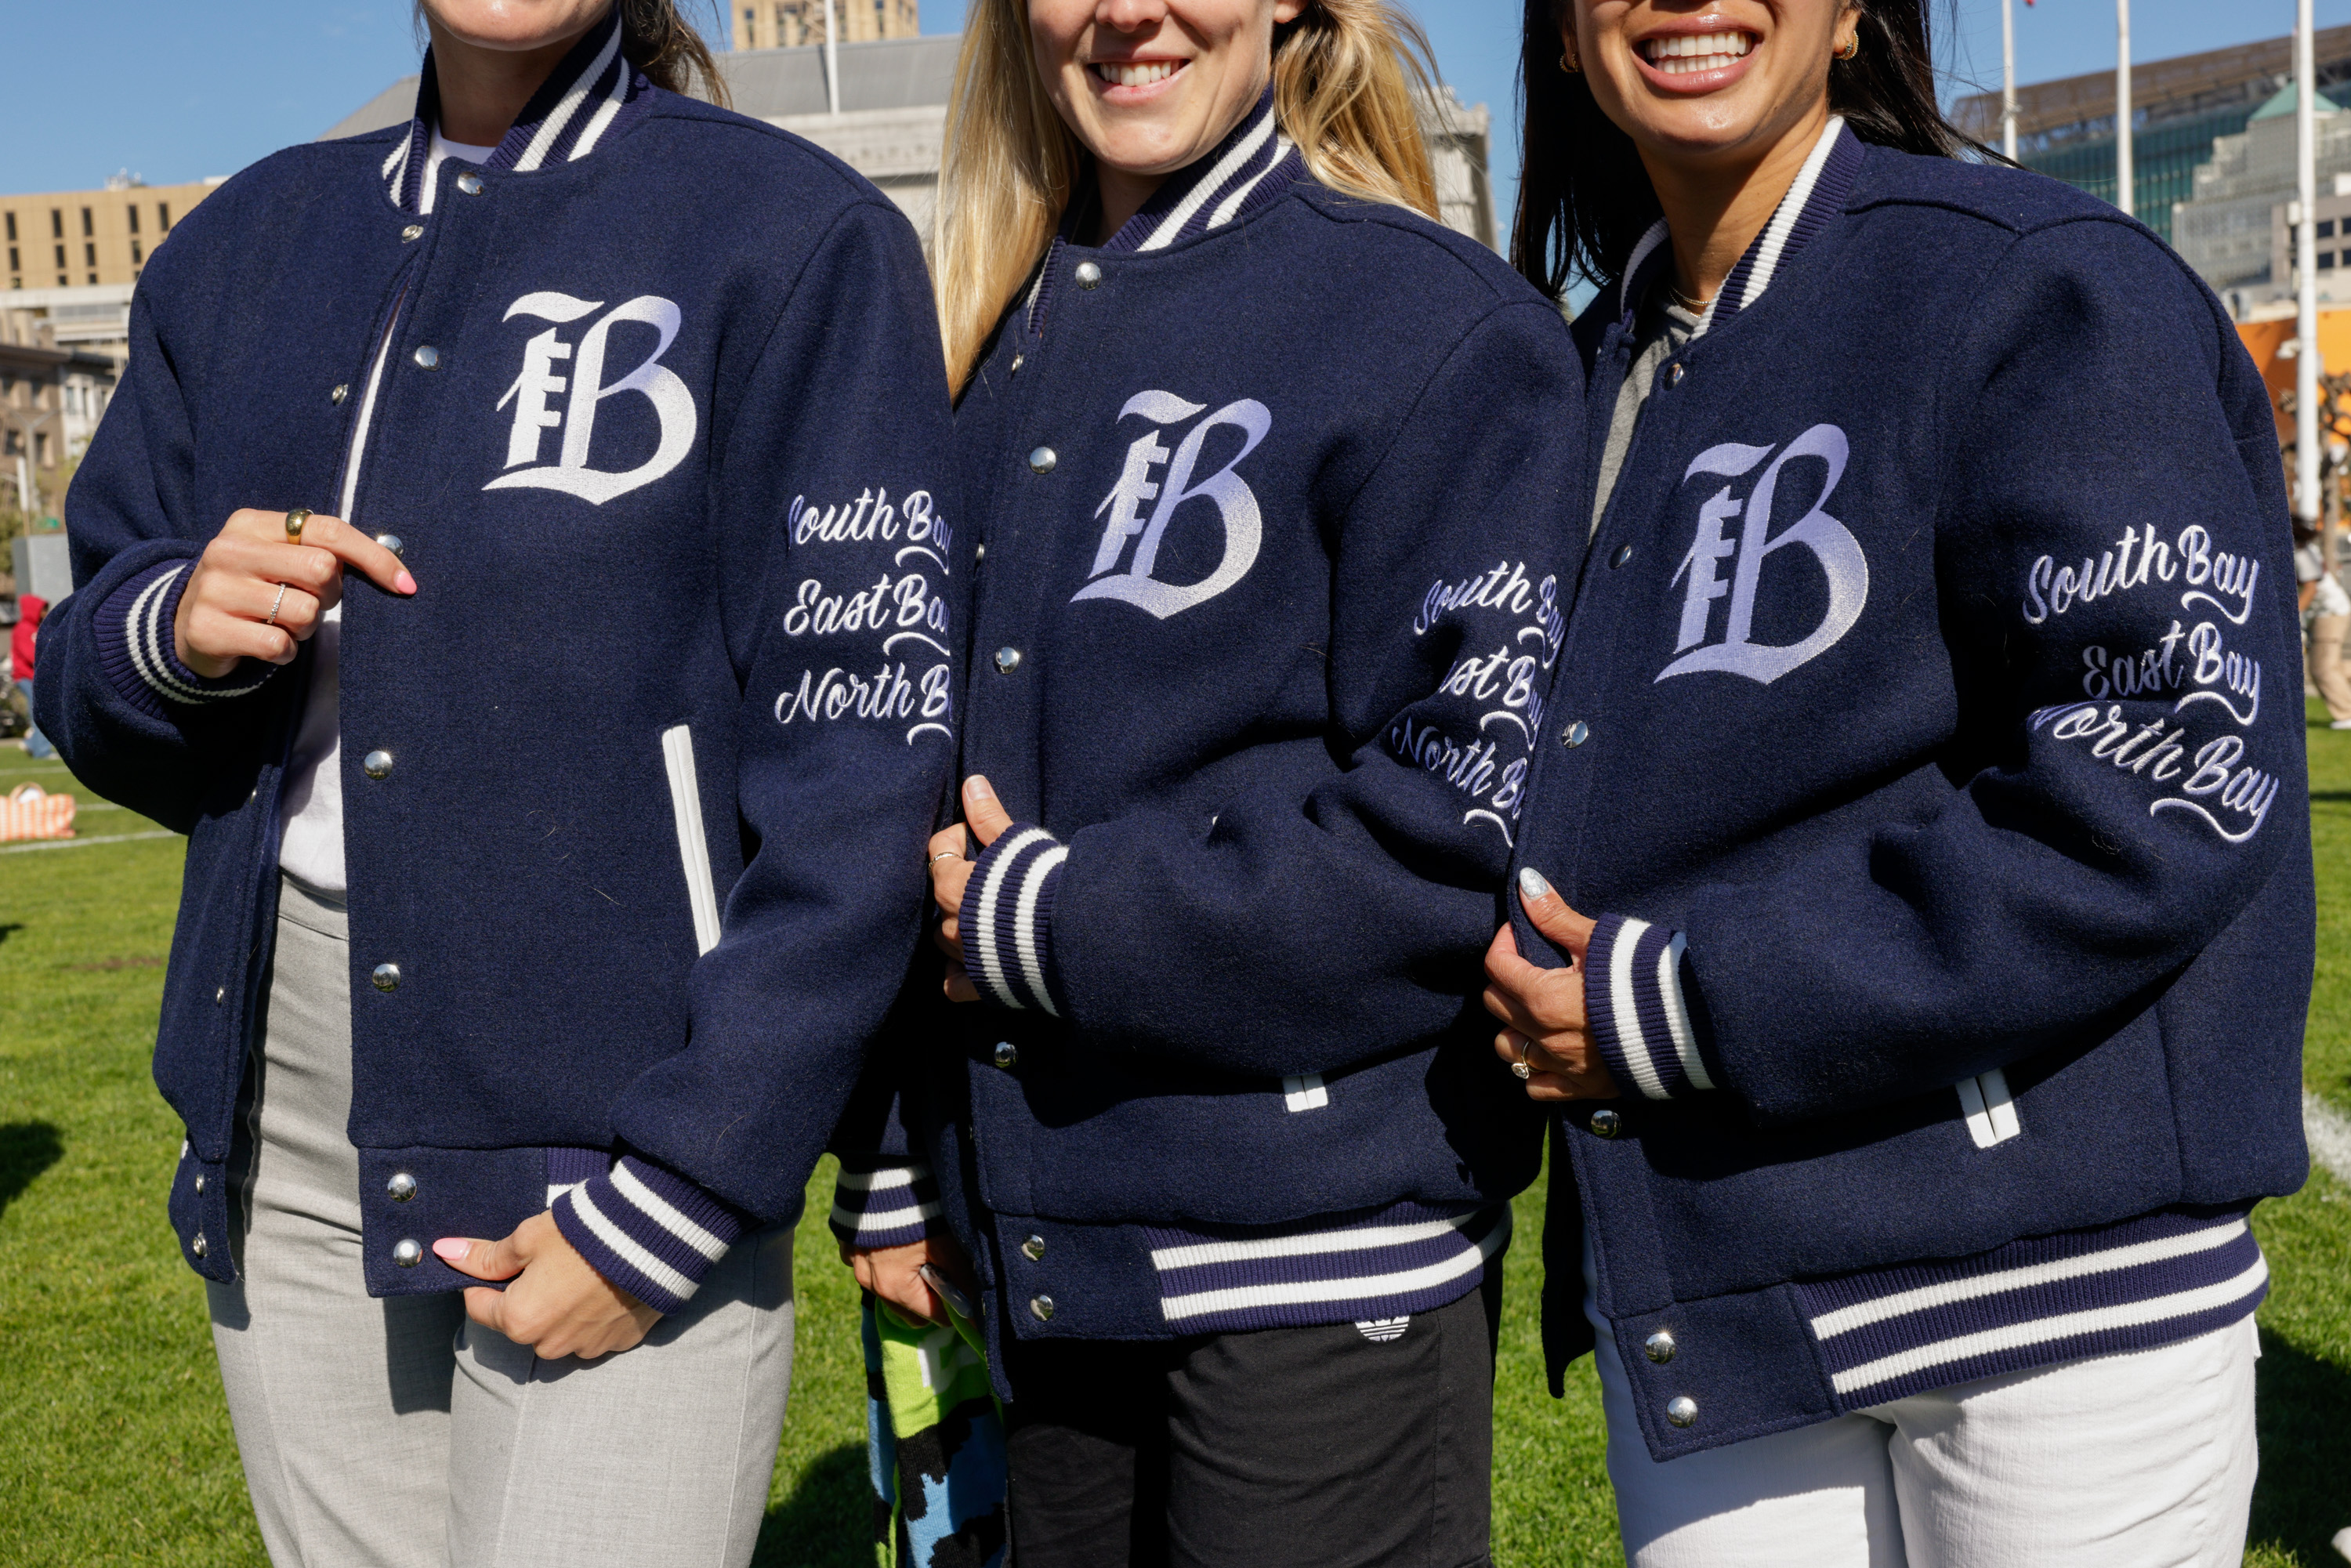 Three people in varsity jackets with &quot;fB&quot; logos, smiling without showing faces, outdoors.